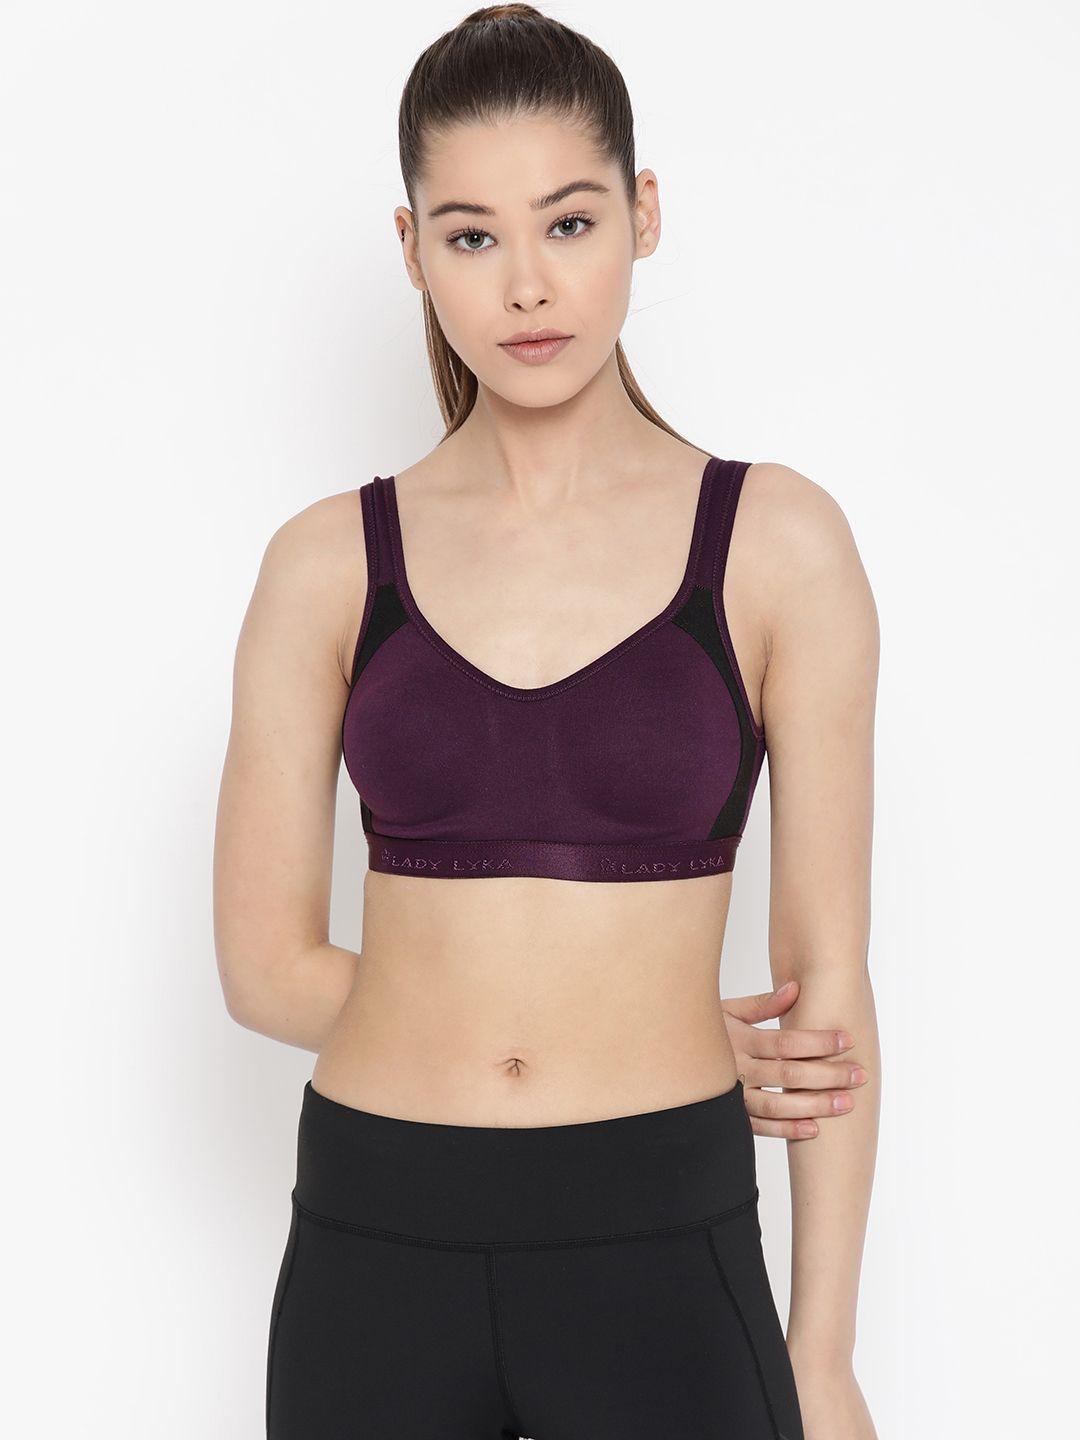 lady-lyka-purple-solid-non-wired-non-padded-sports-bra